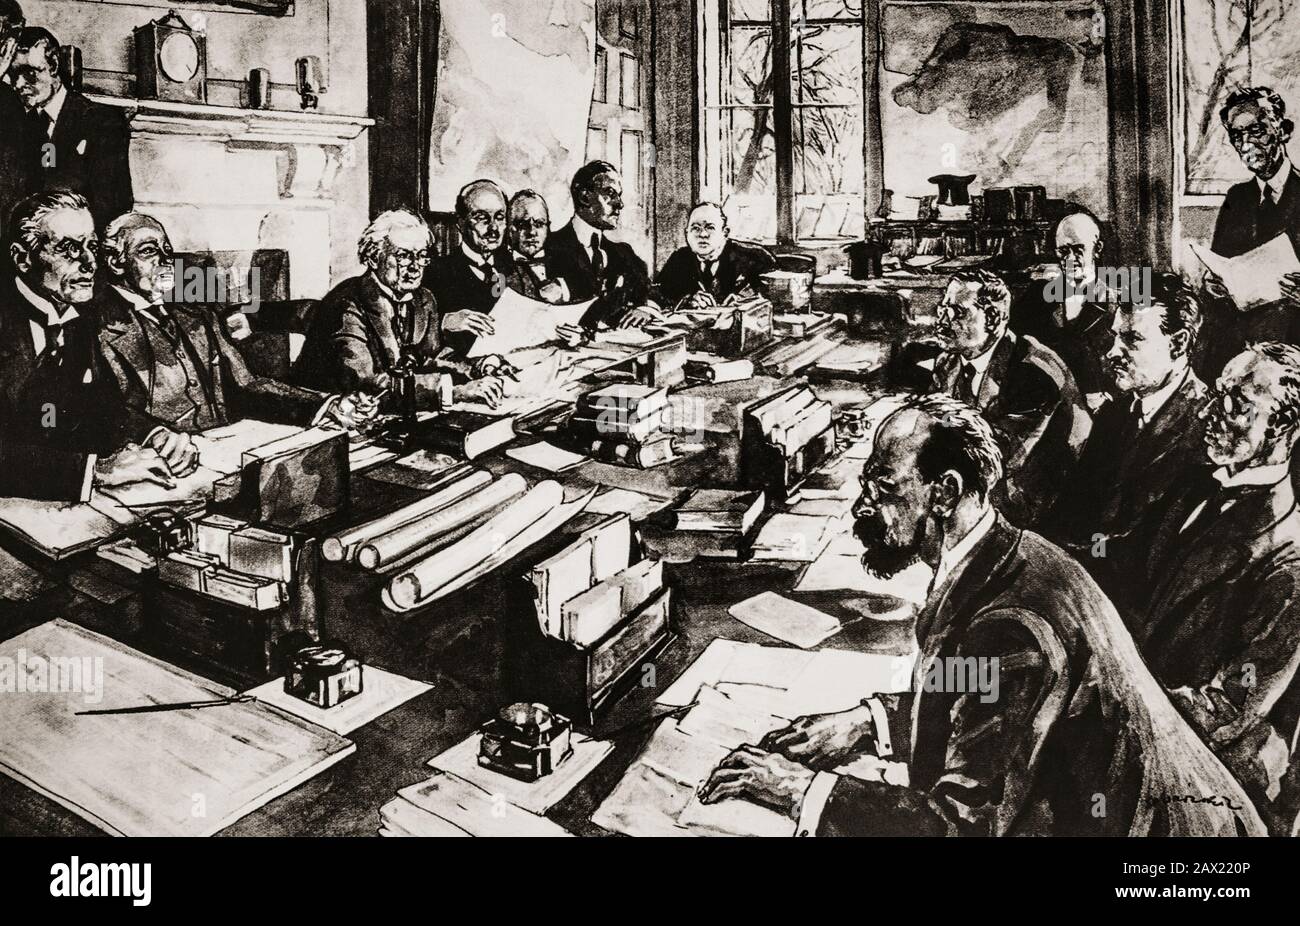 Treaty talks in the cabinet room of No 10 Downing Street in London in 1921. On the left is the British team including Lloyd George and Winston Churchill. To the right are heads of the Irish delegation, Michael Collins and Arthur Griffith, who greatly impressed the British representatives. With regard to the Treaty, he himself was fully committed to and satisfied with it and genuinely convinced that its terms were the best that Ireland could realistically have hoped to achieve. He bitterly resented the opposition to it from republican purists – especially de Valera. Stock Photo